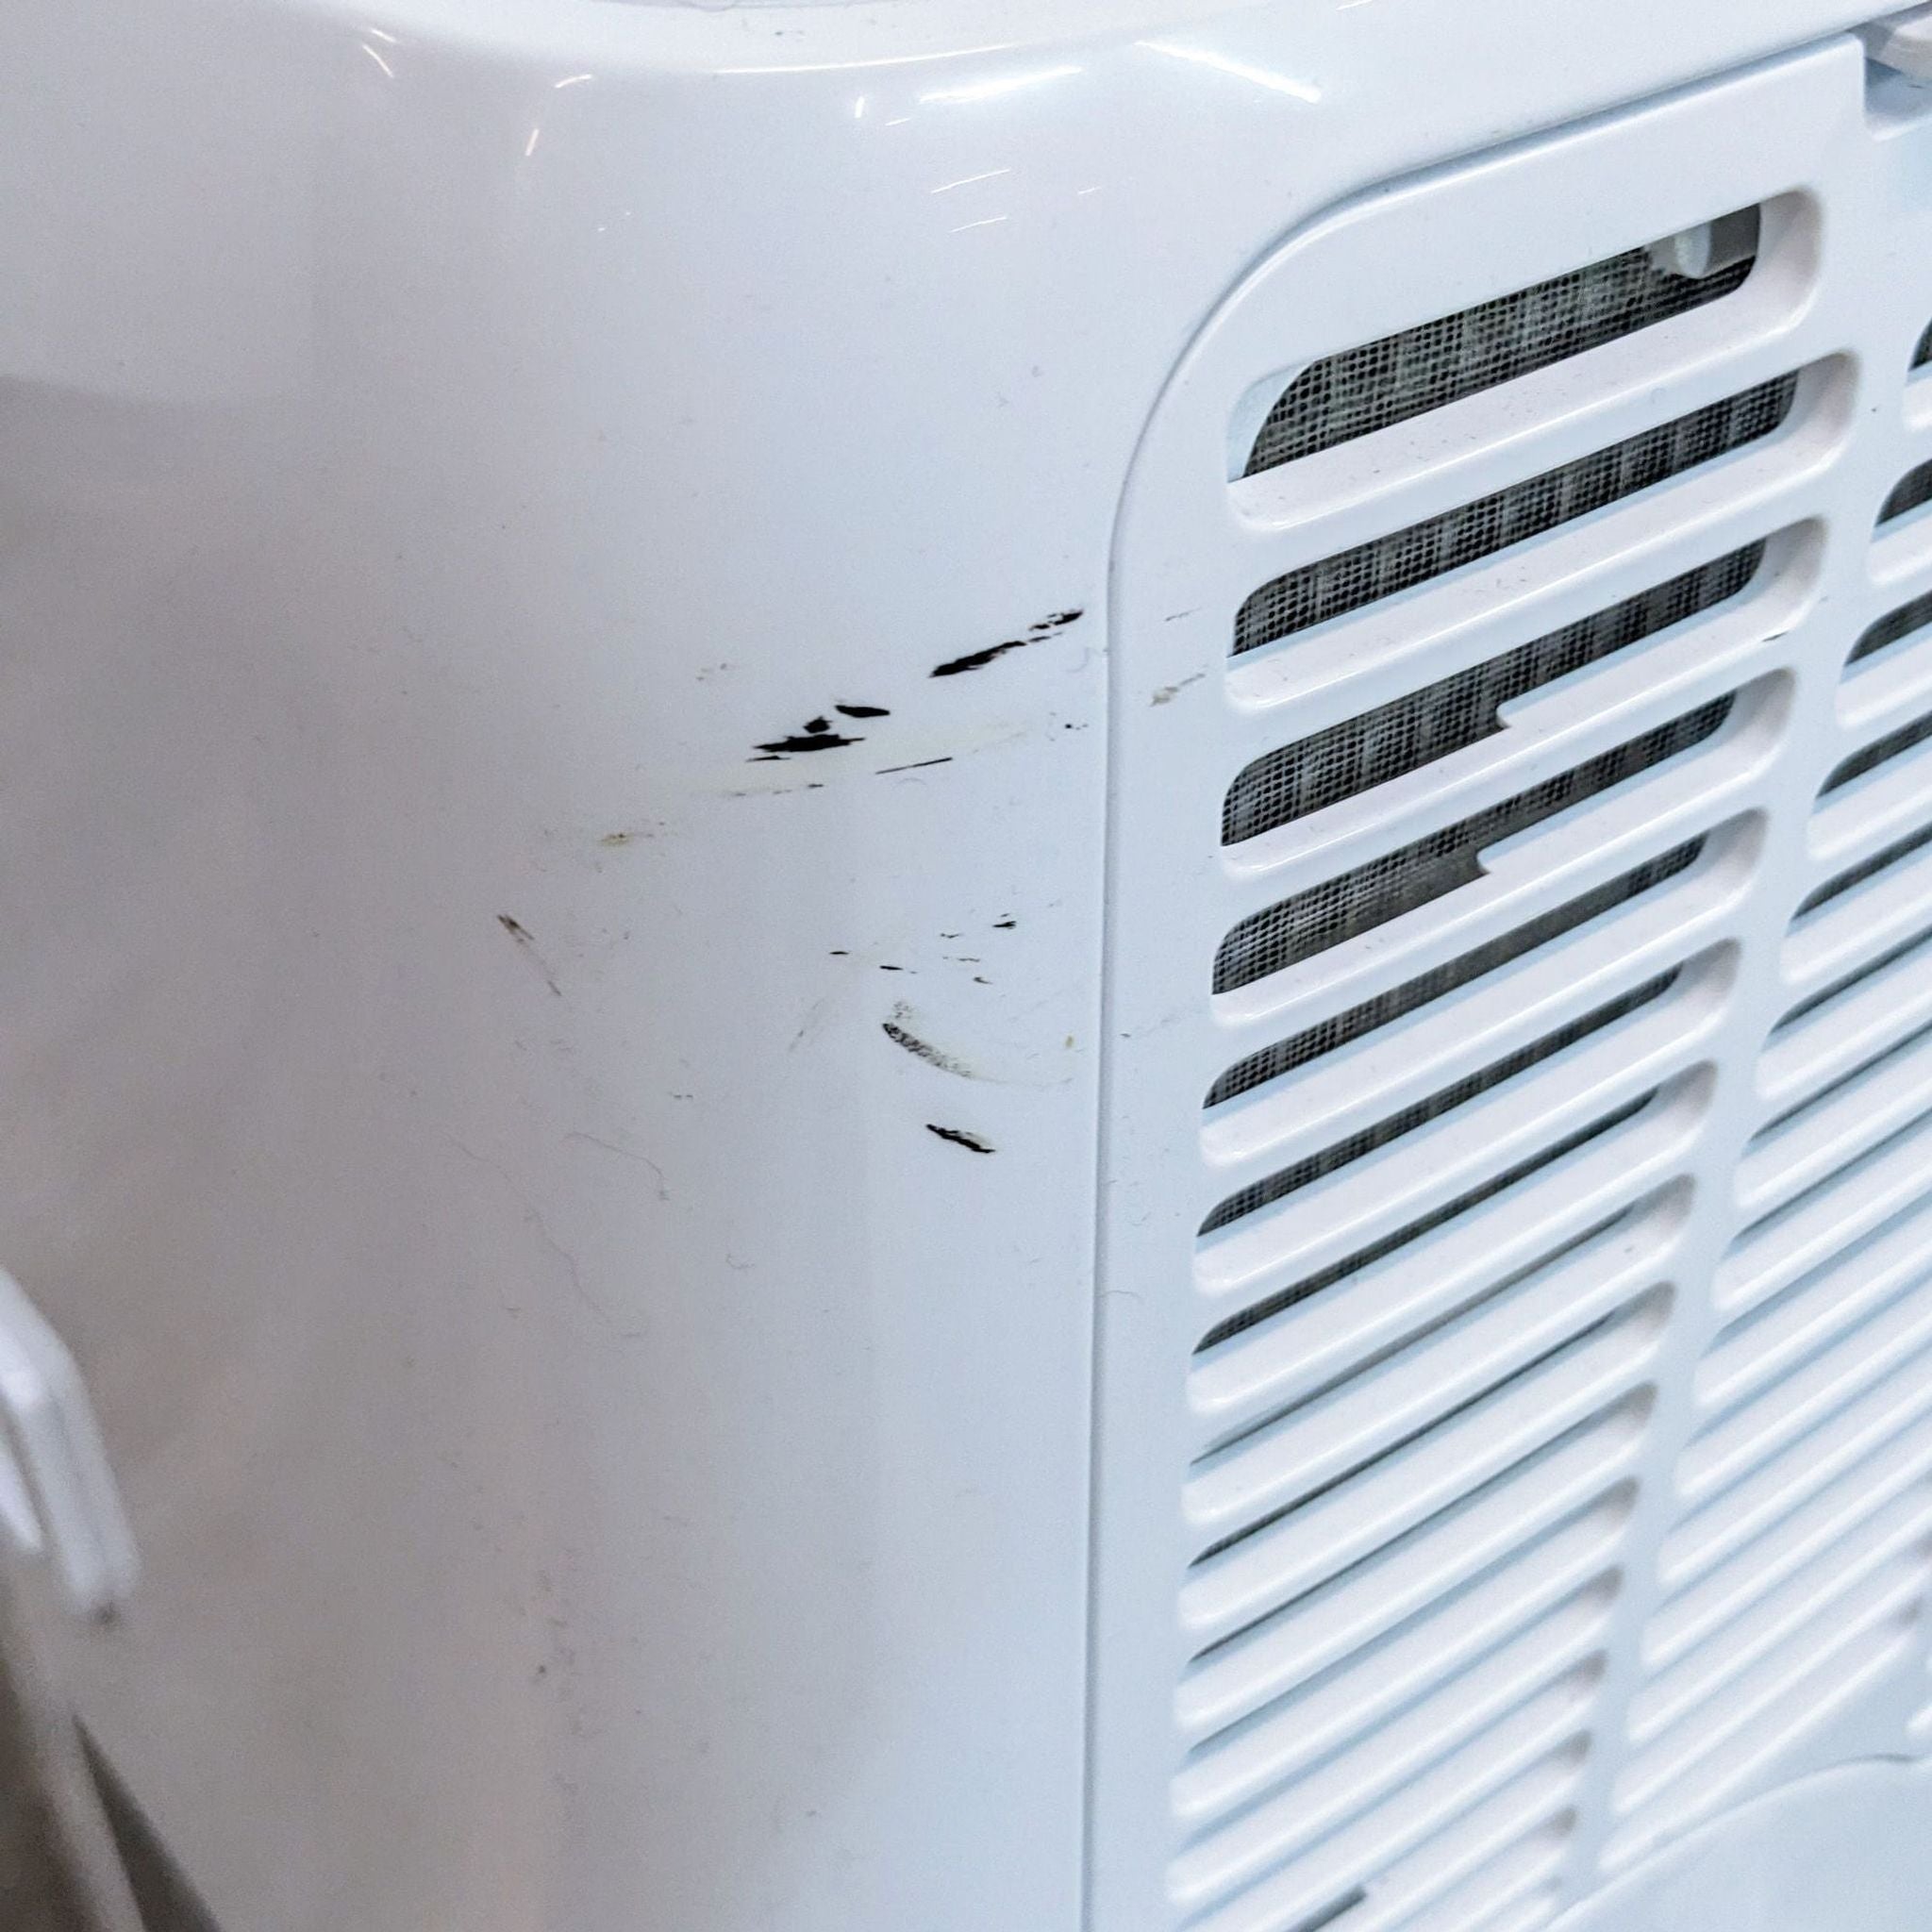 Image 3: Close-up of a Black + Decker AC unit showing wear and tear with visible scuff marks on its surface.